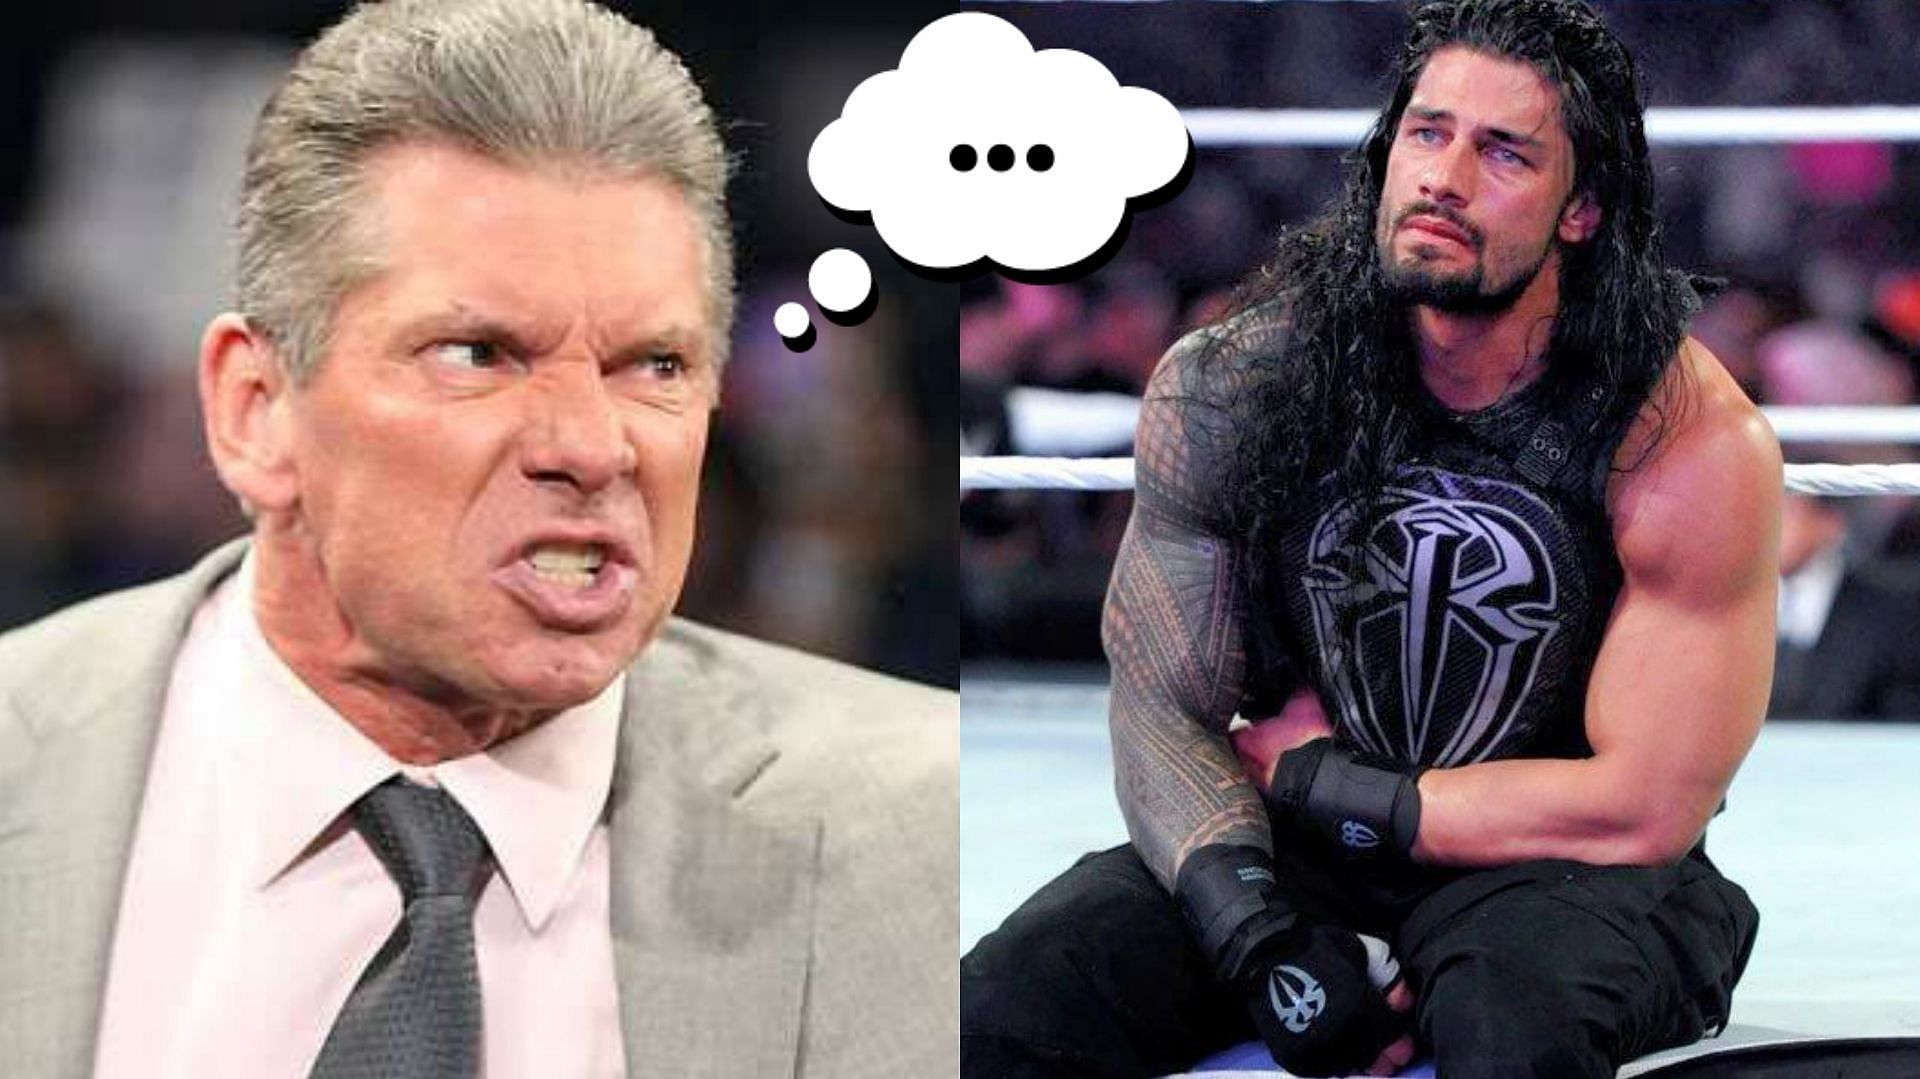 Vince McMahon and Roman Reigns